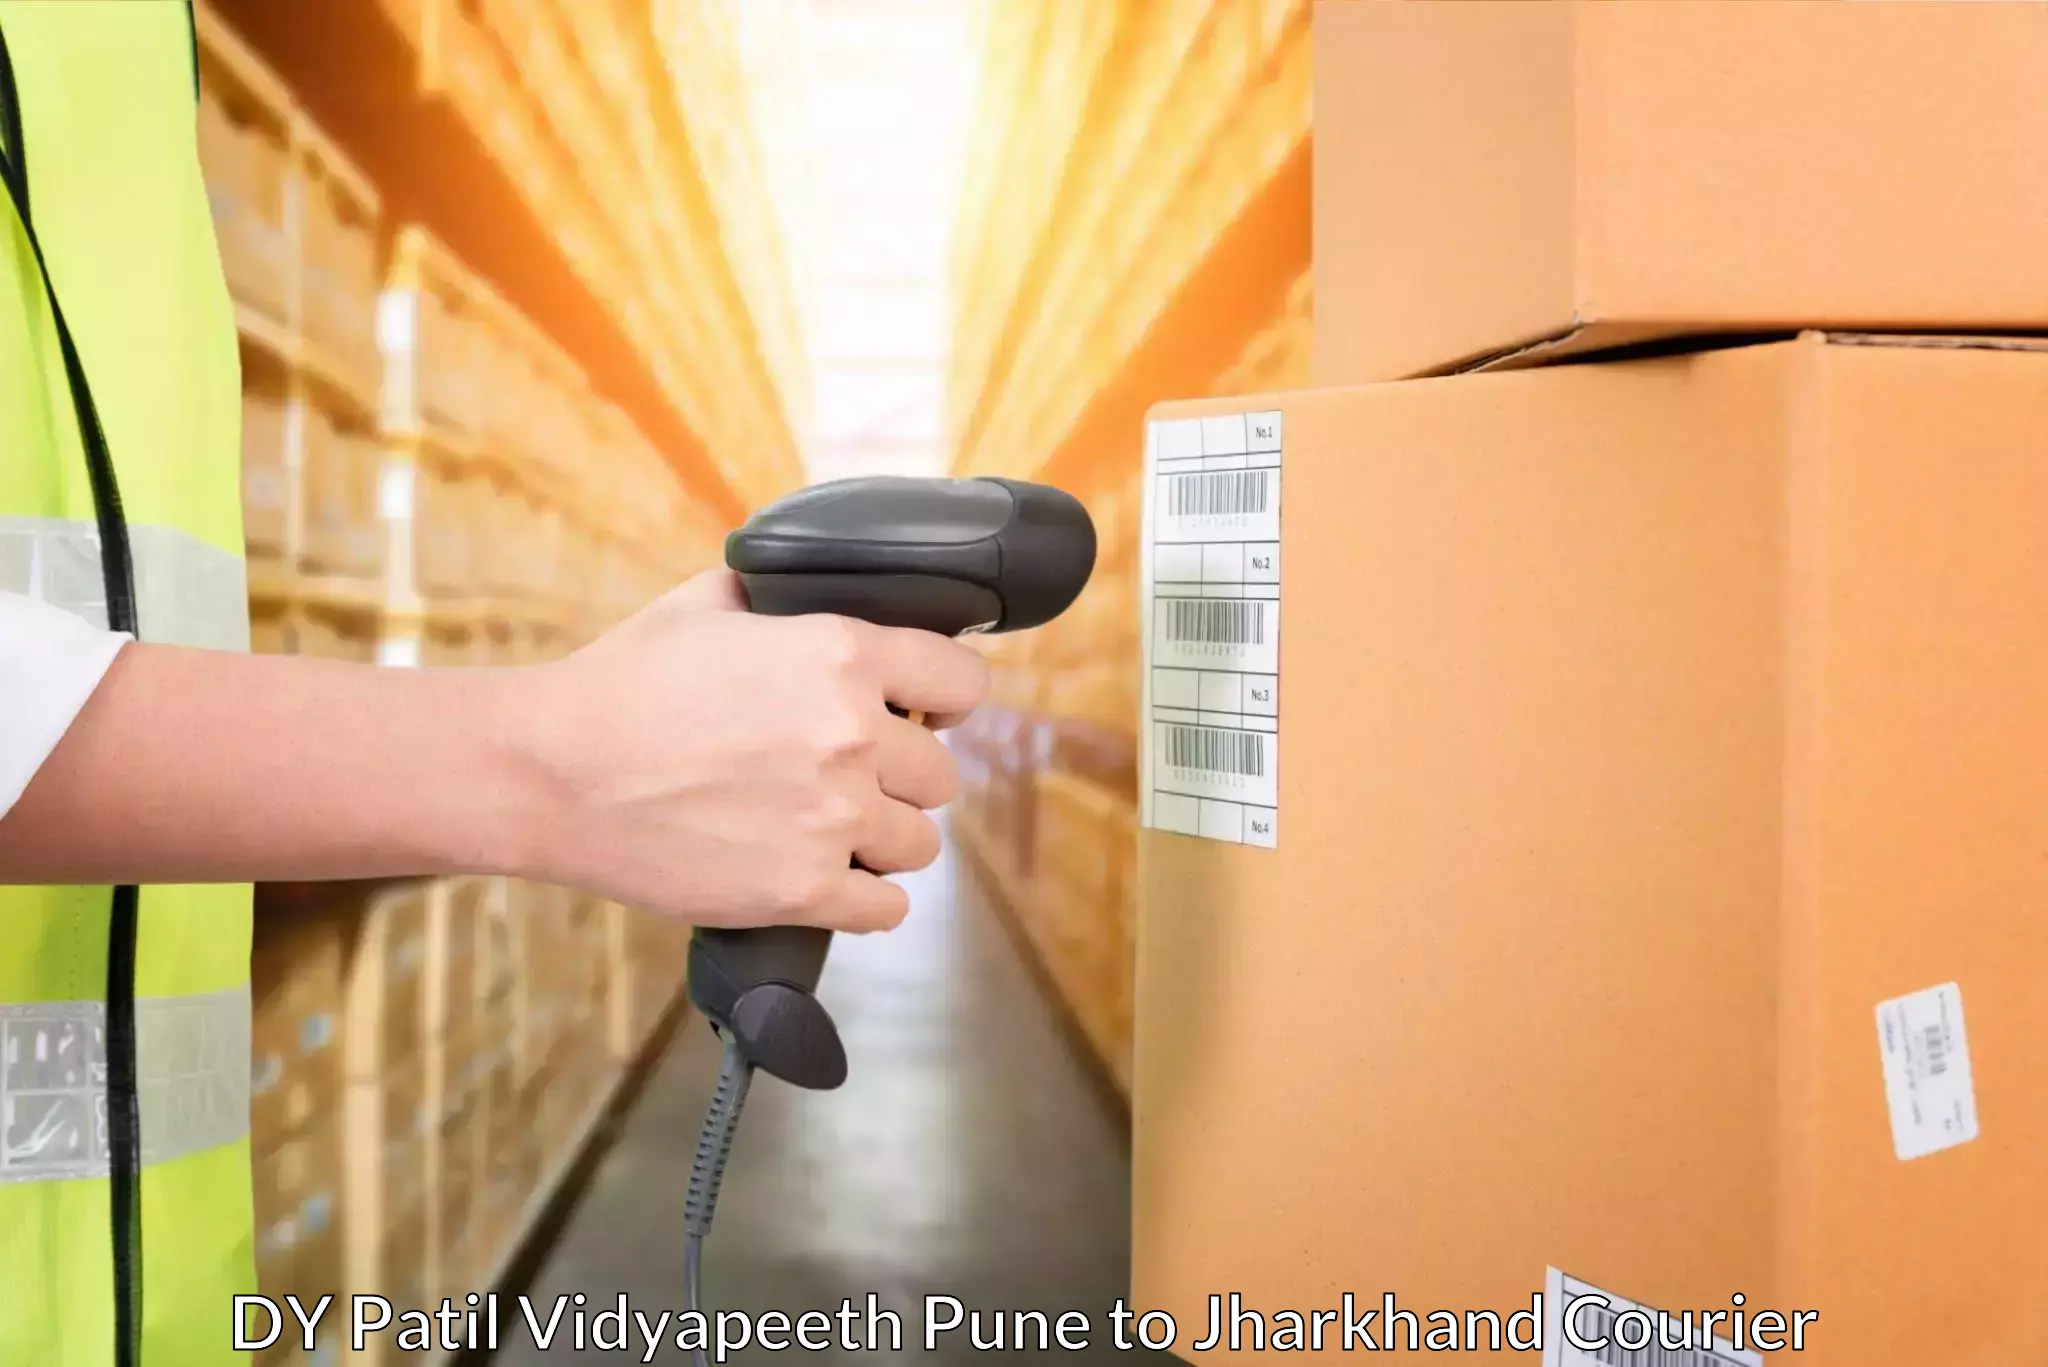 Tailored delivery services DY Patil Vidyapeeth Pune to Daltonganj